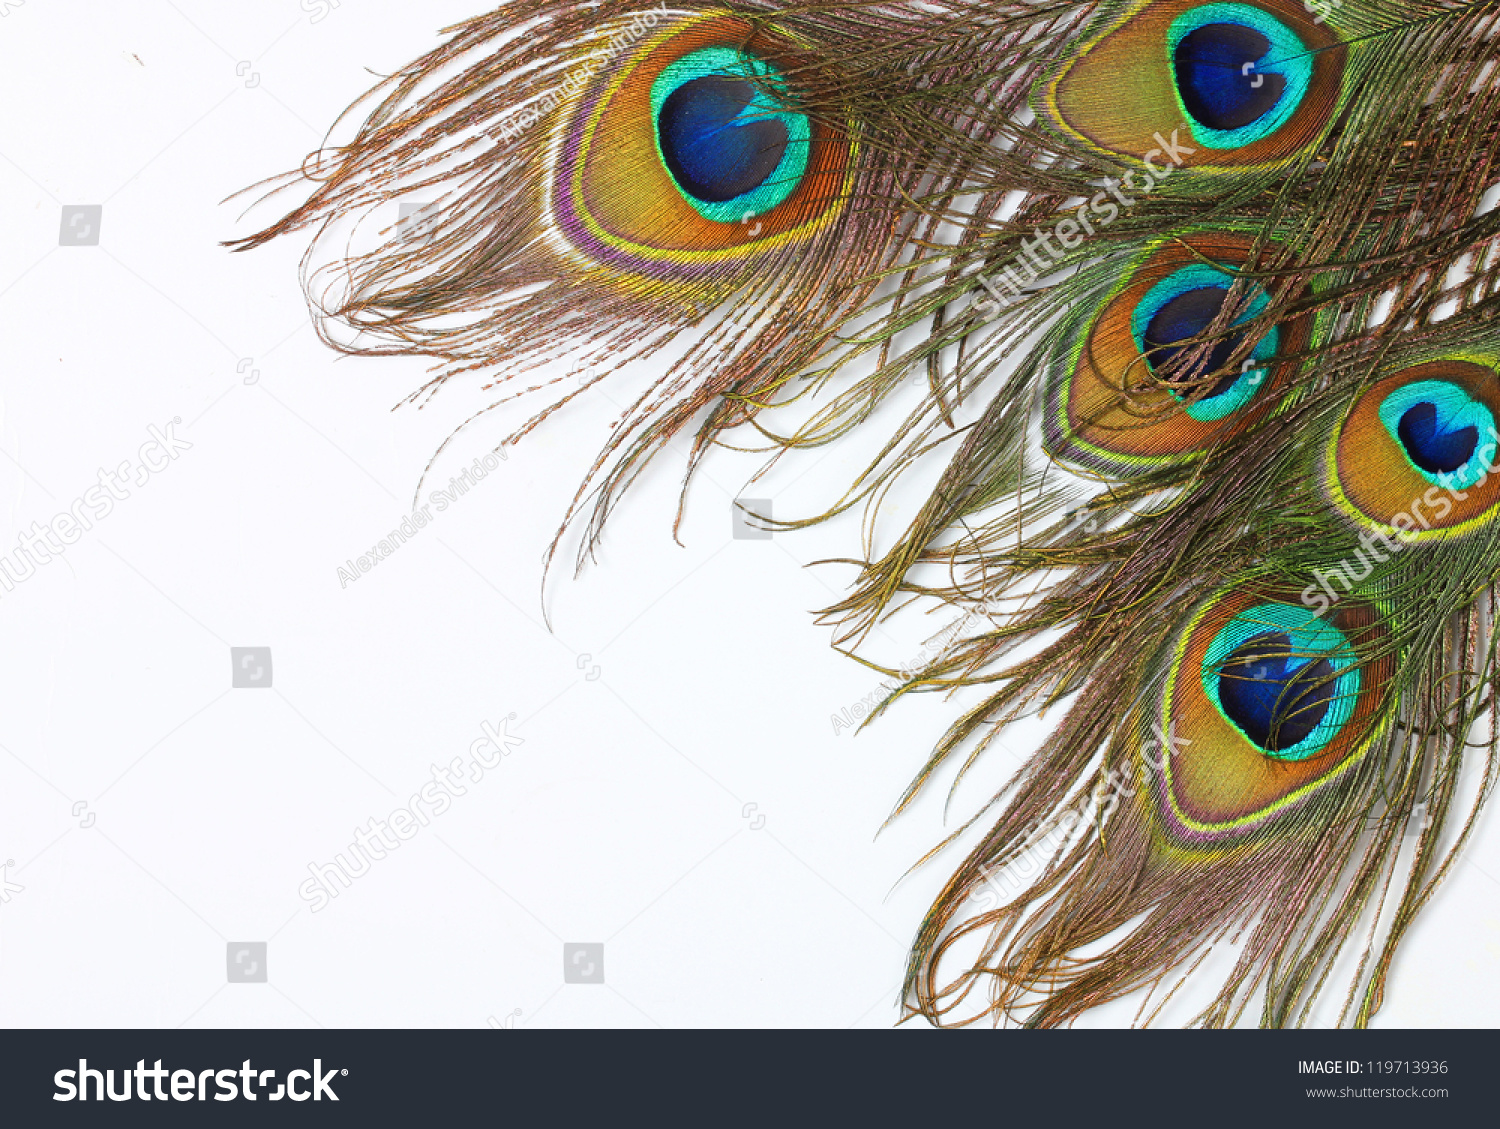 Peacock Feathers On White Background Stock Photo 119713936 : Shutterstock